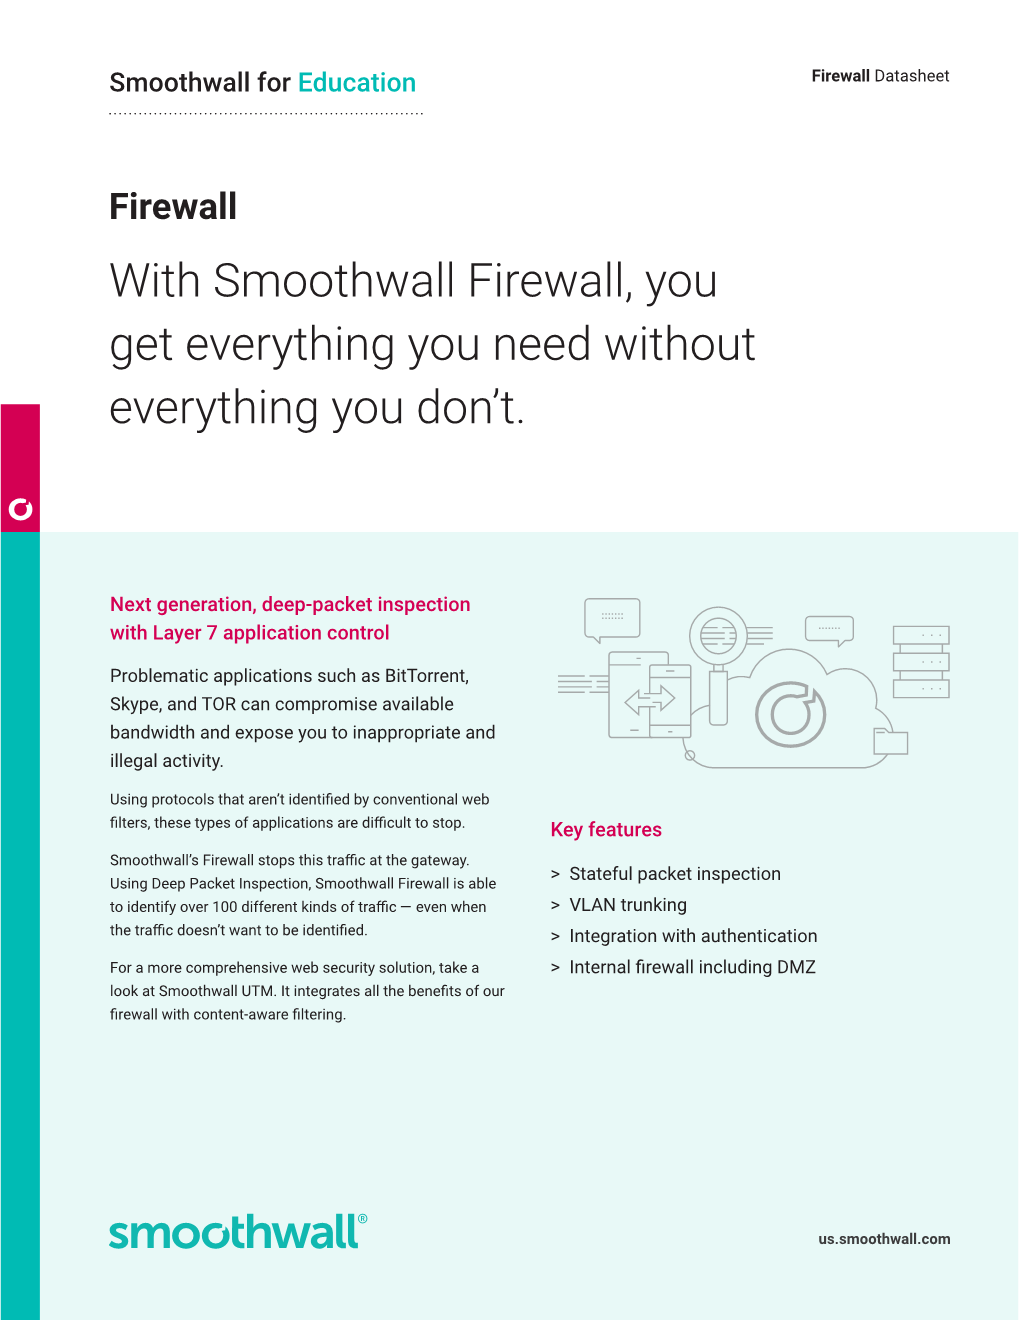 With Smoothwall Firewall, You Get Everything You Need Without Everything You Don’T